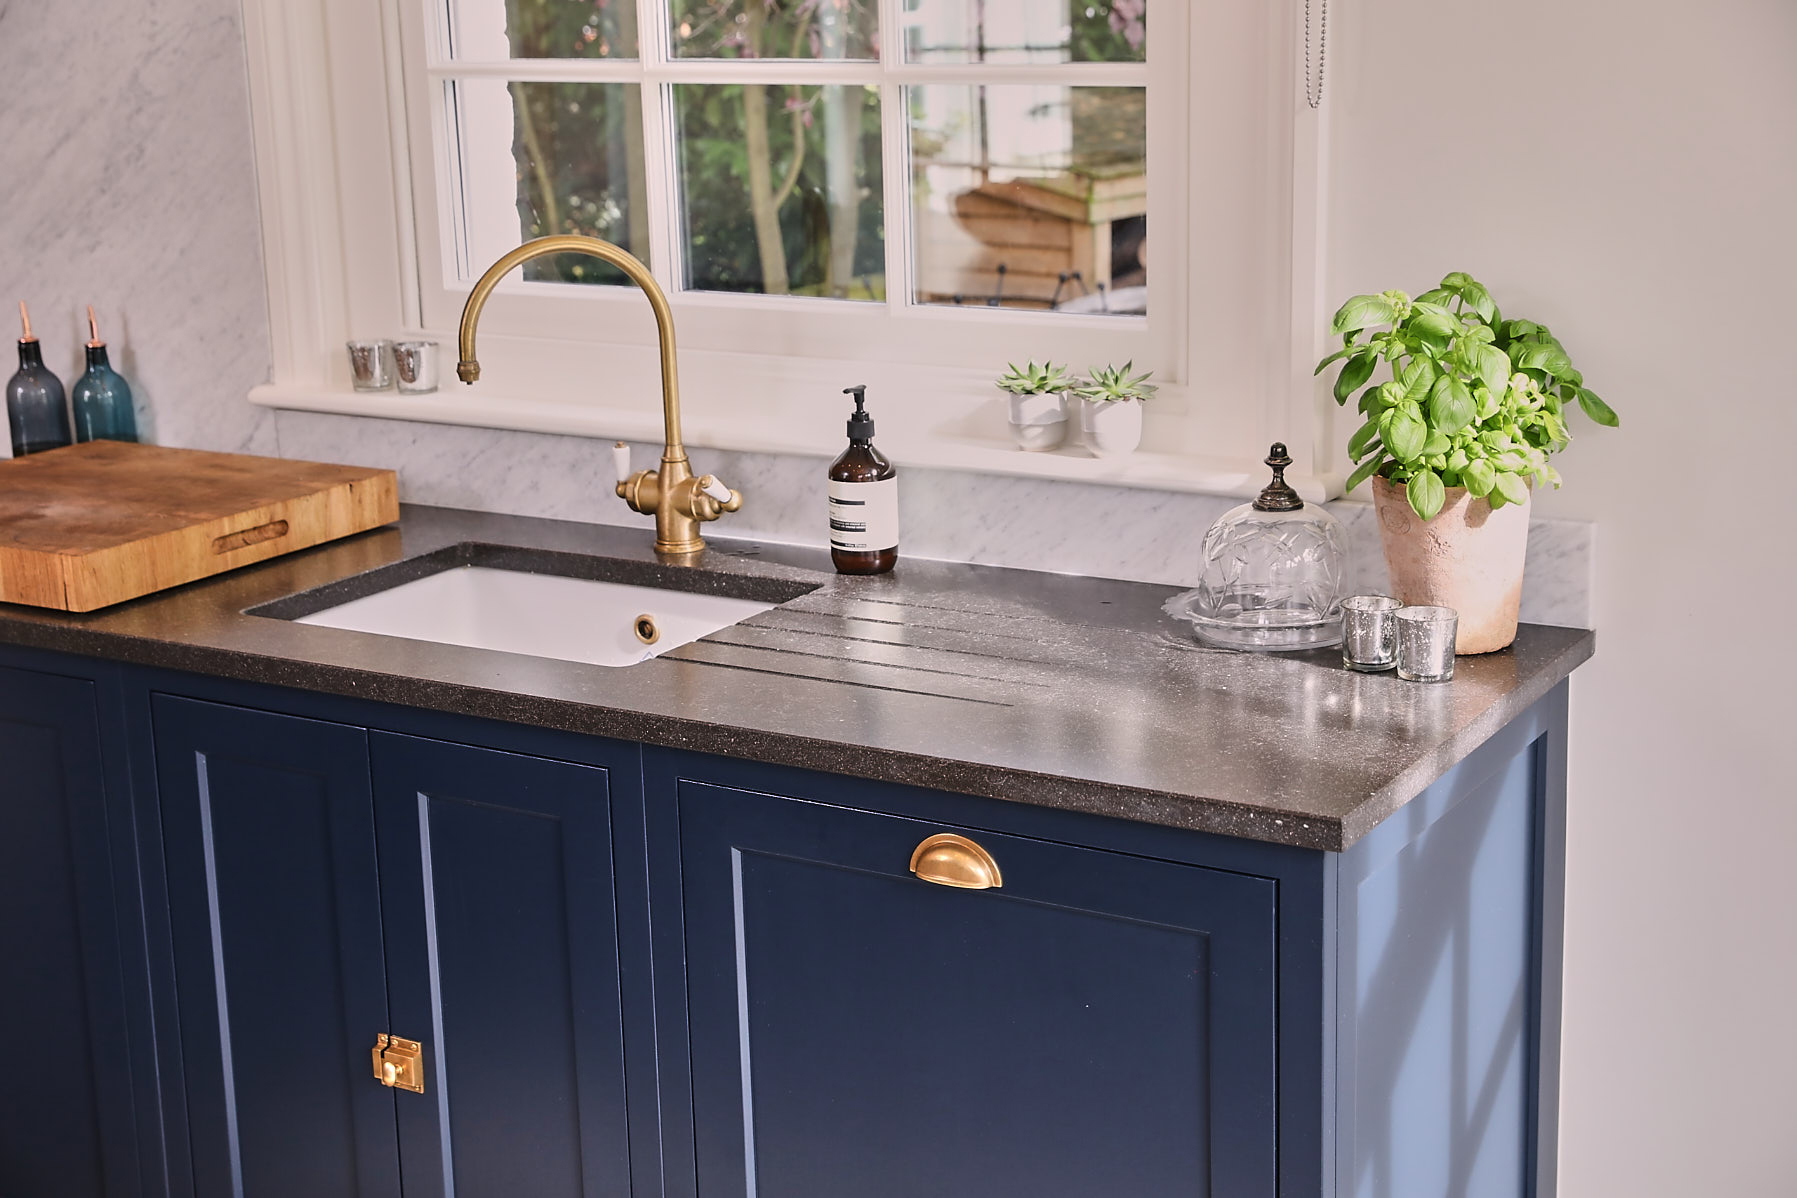 Integrated dishwasher with painted blue in-frame cabinets with antique copper cup handle